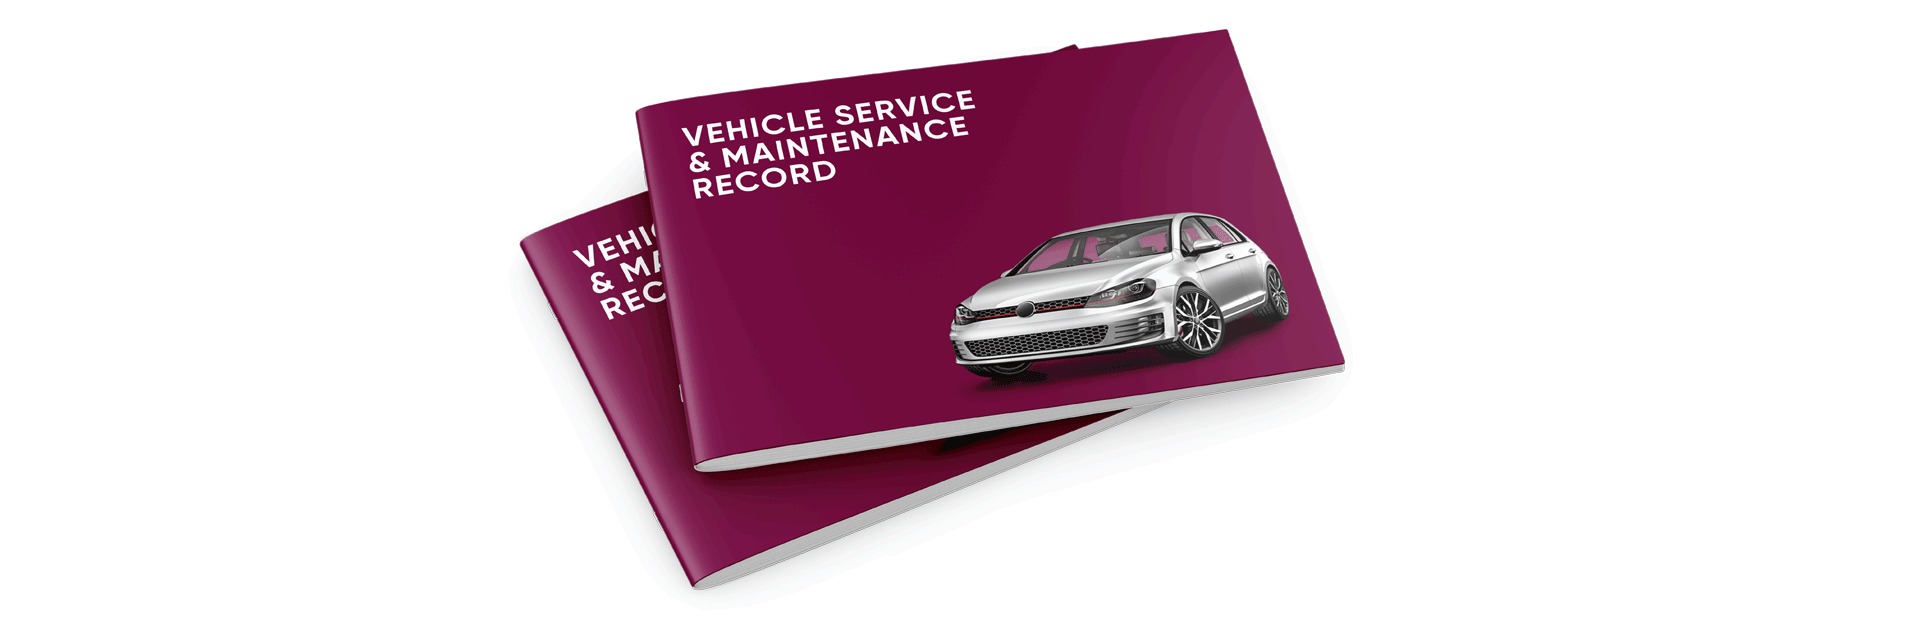 Vehicle service and maintenance history book